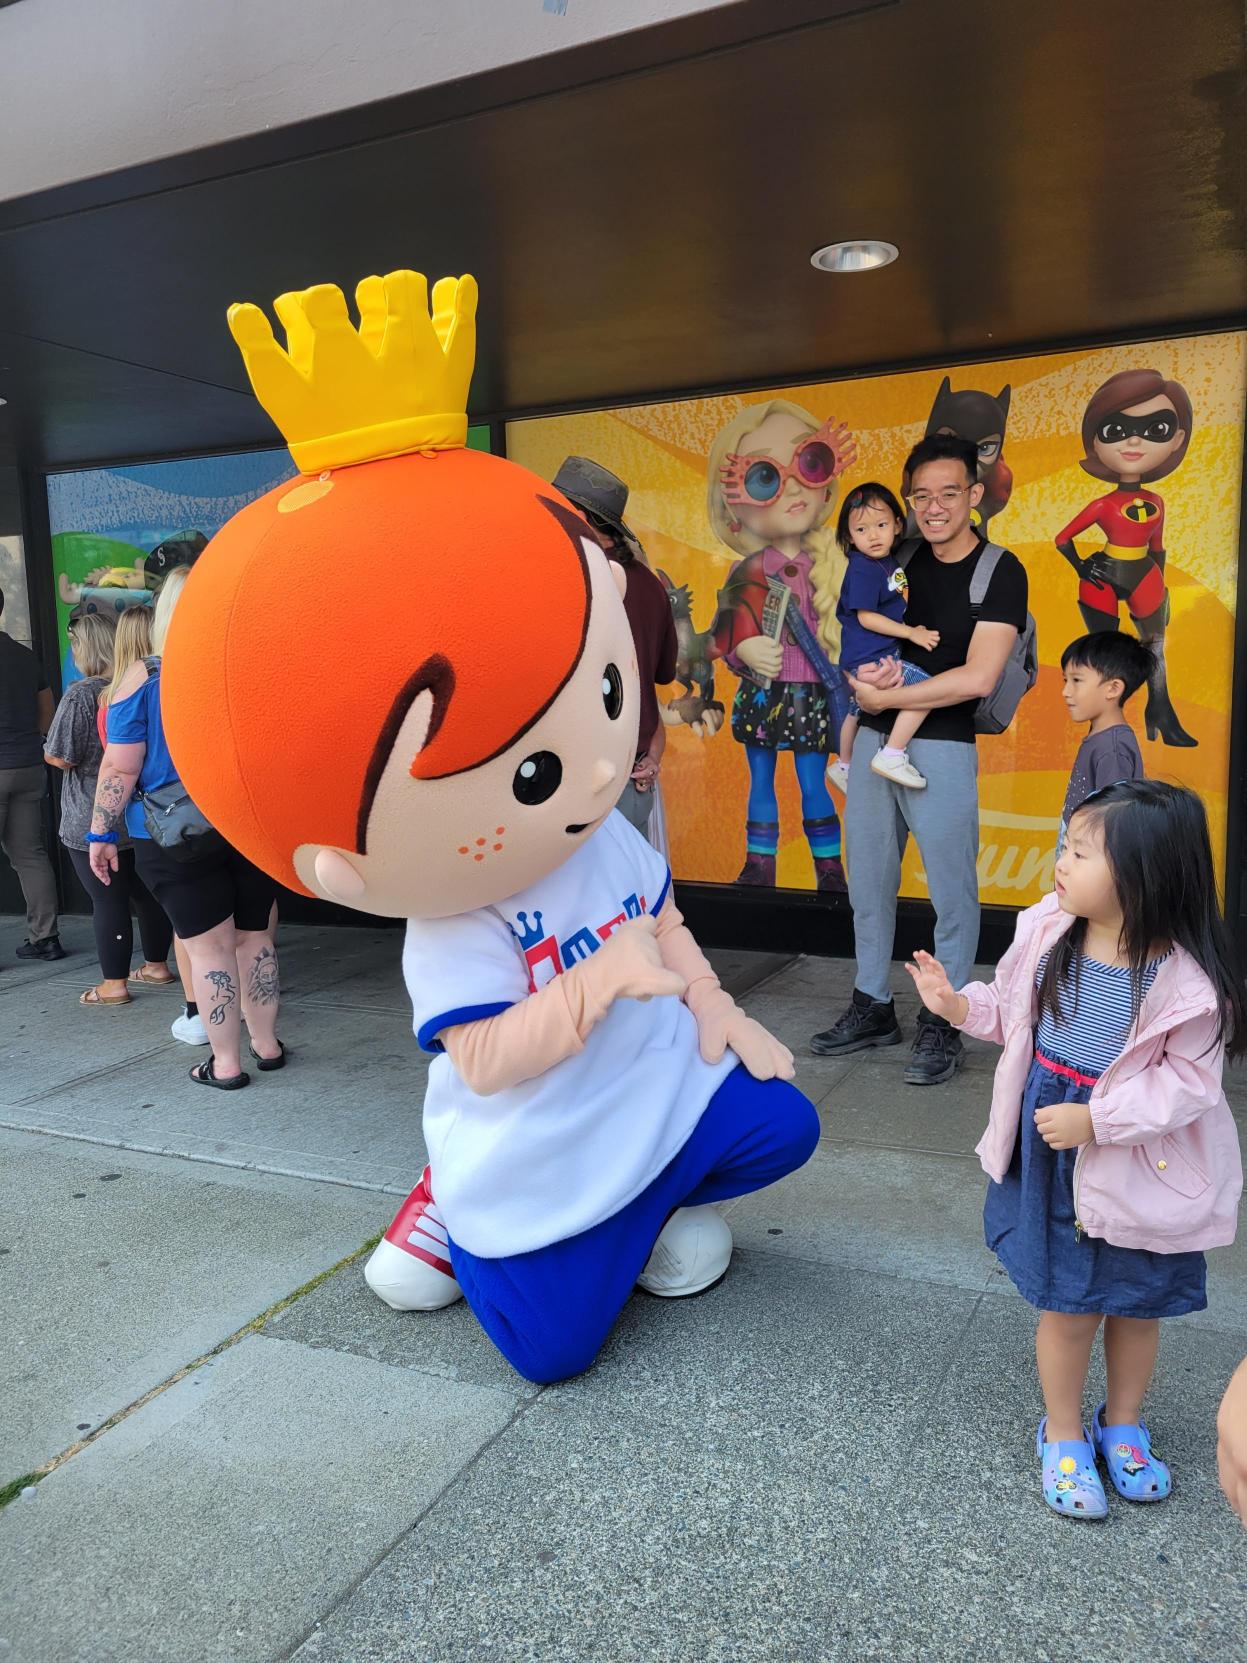 Freddy Funko! Freddy Funko greets Funatics in line outside the Everett store and waves a special hello to a child in line.